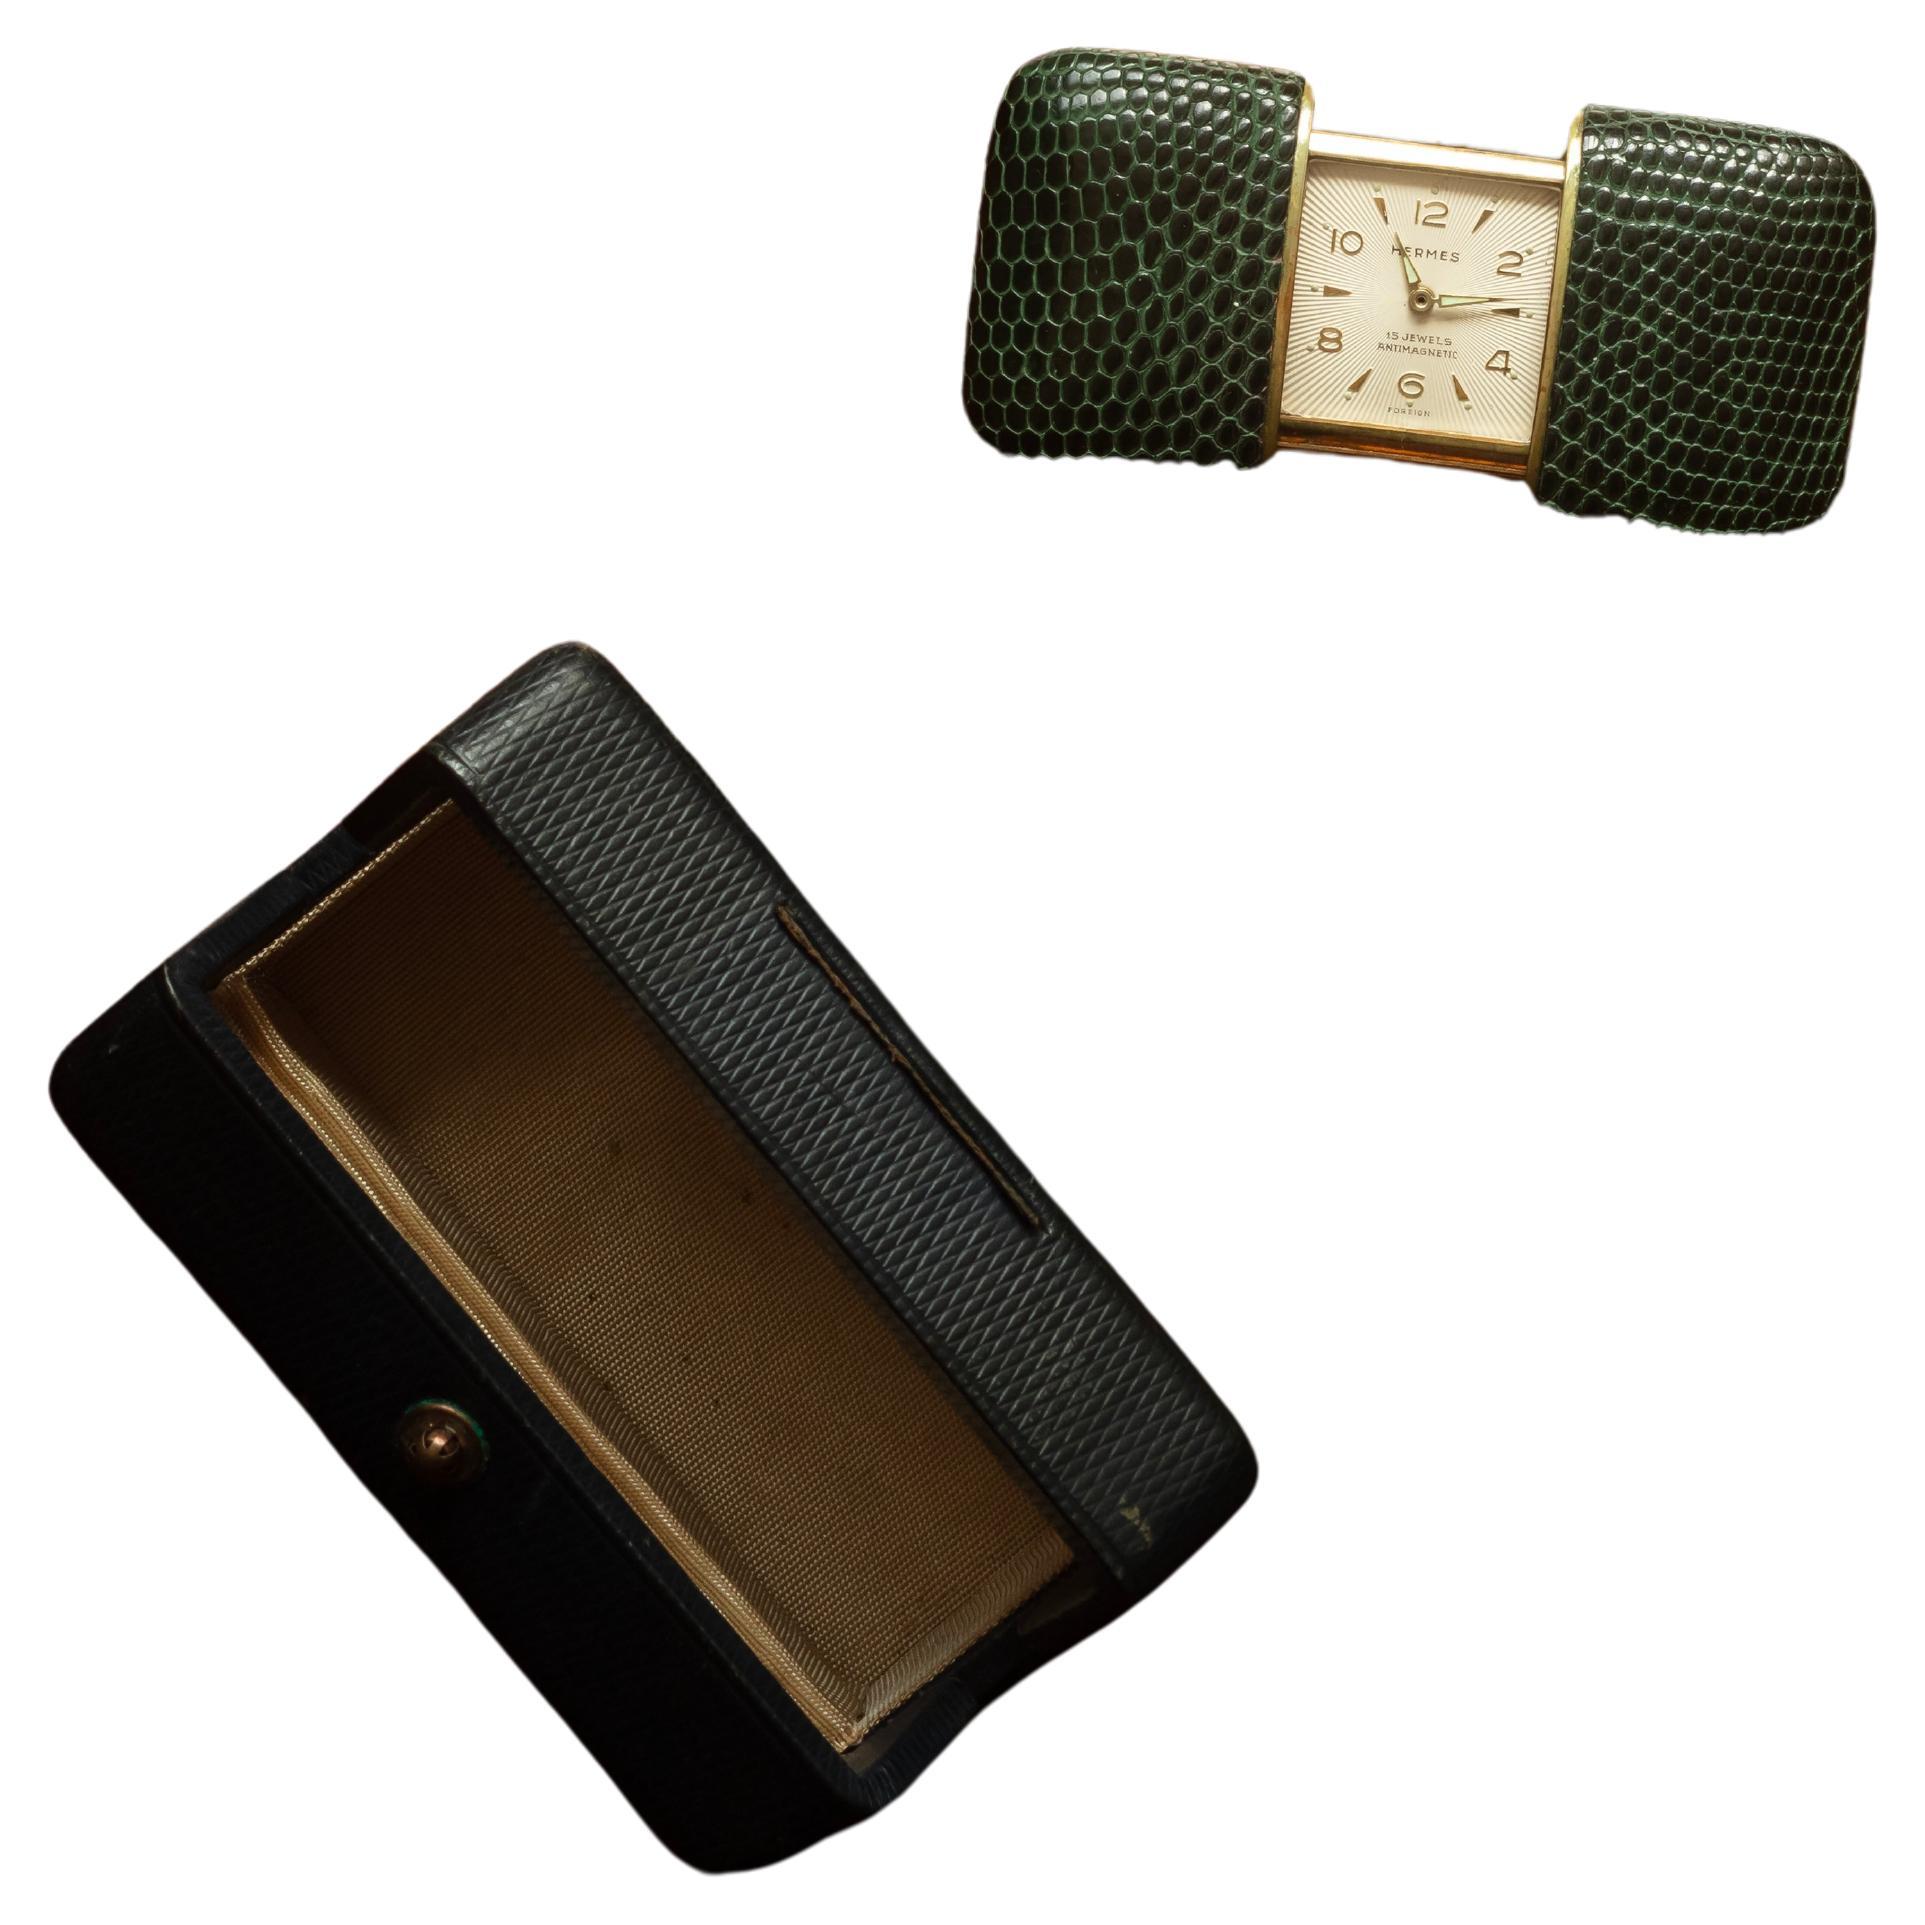 Hermes watch, 15 Jewels Antimagnetic, in green lizard leather case. For Sale